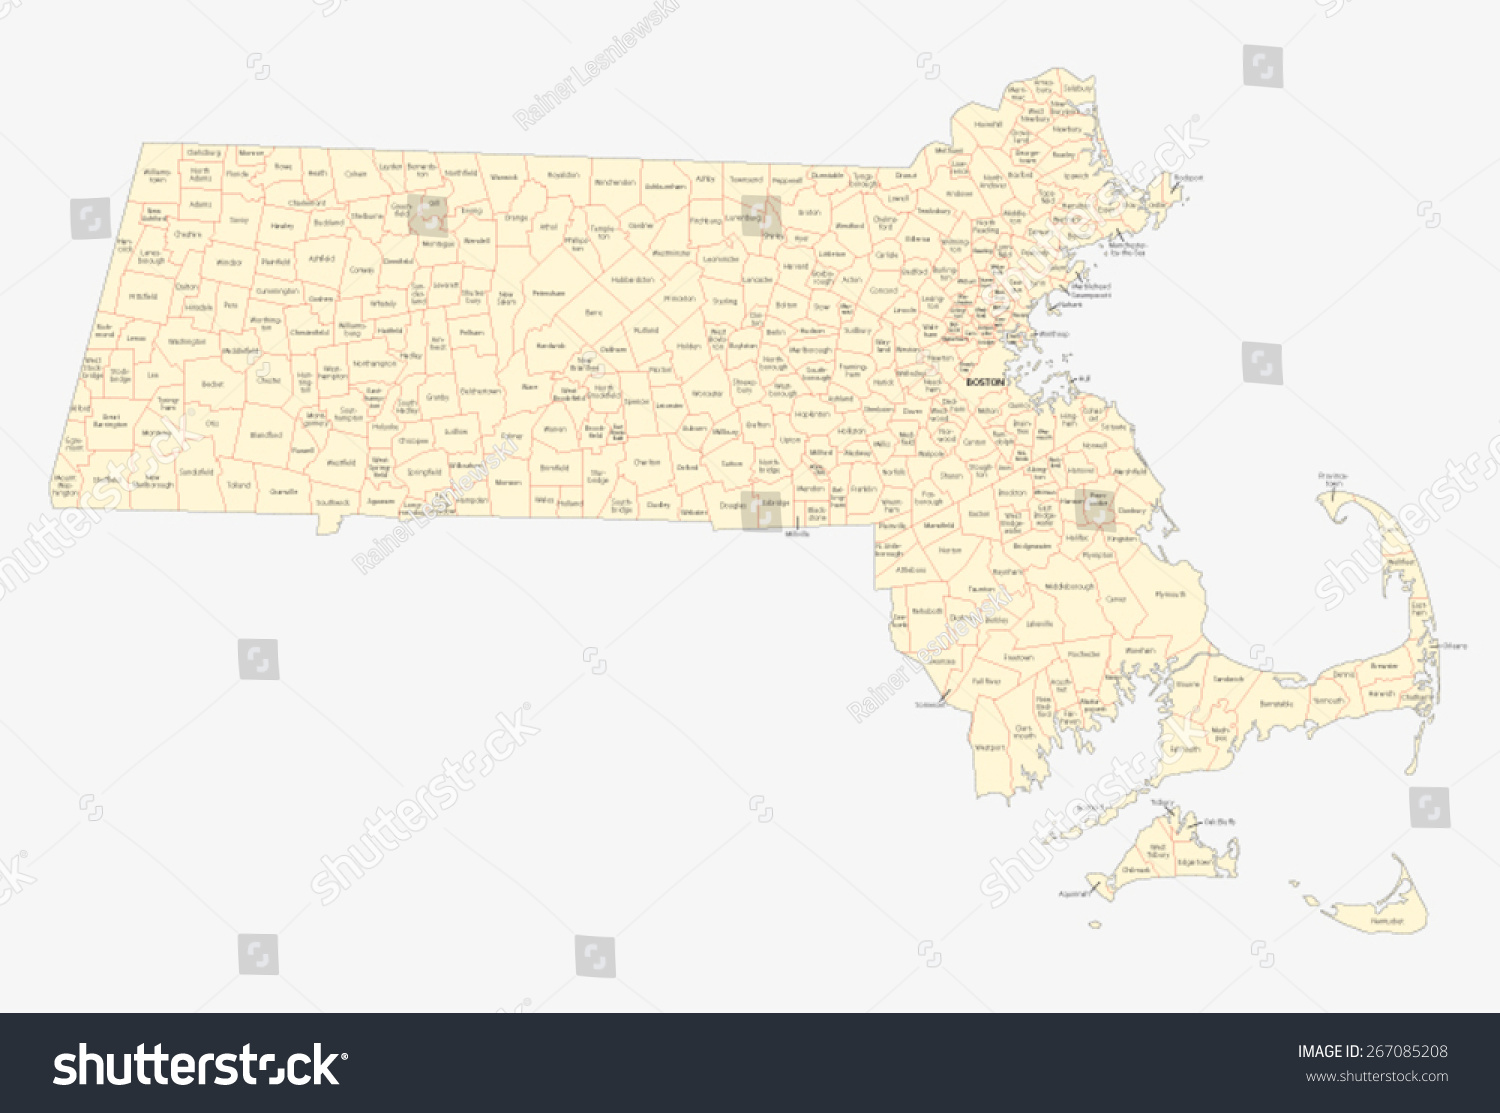 SVG of massachusetts cities and towns map svg